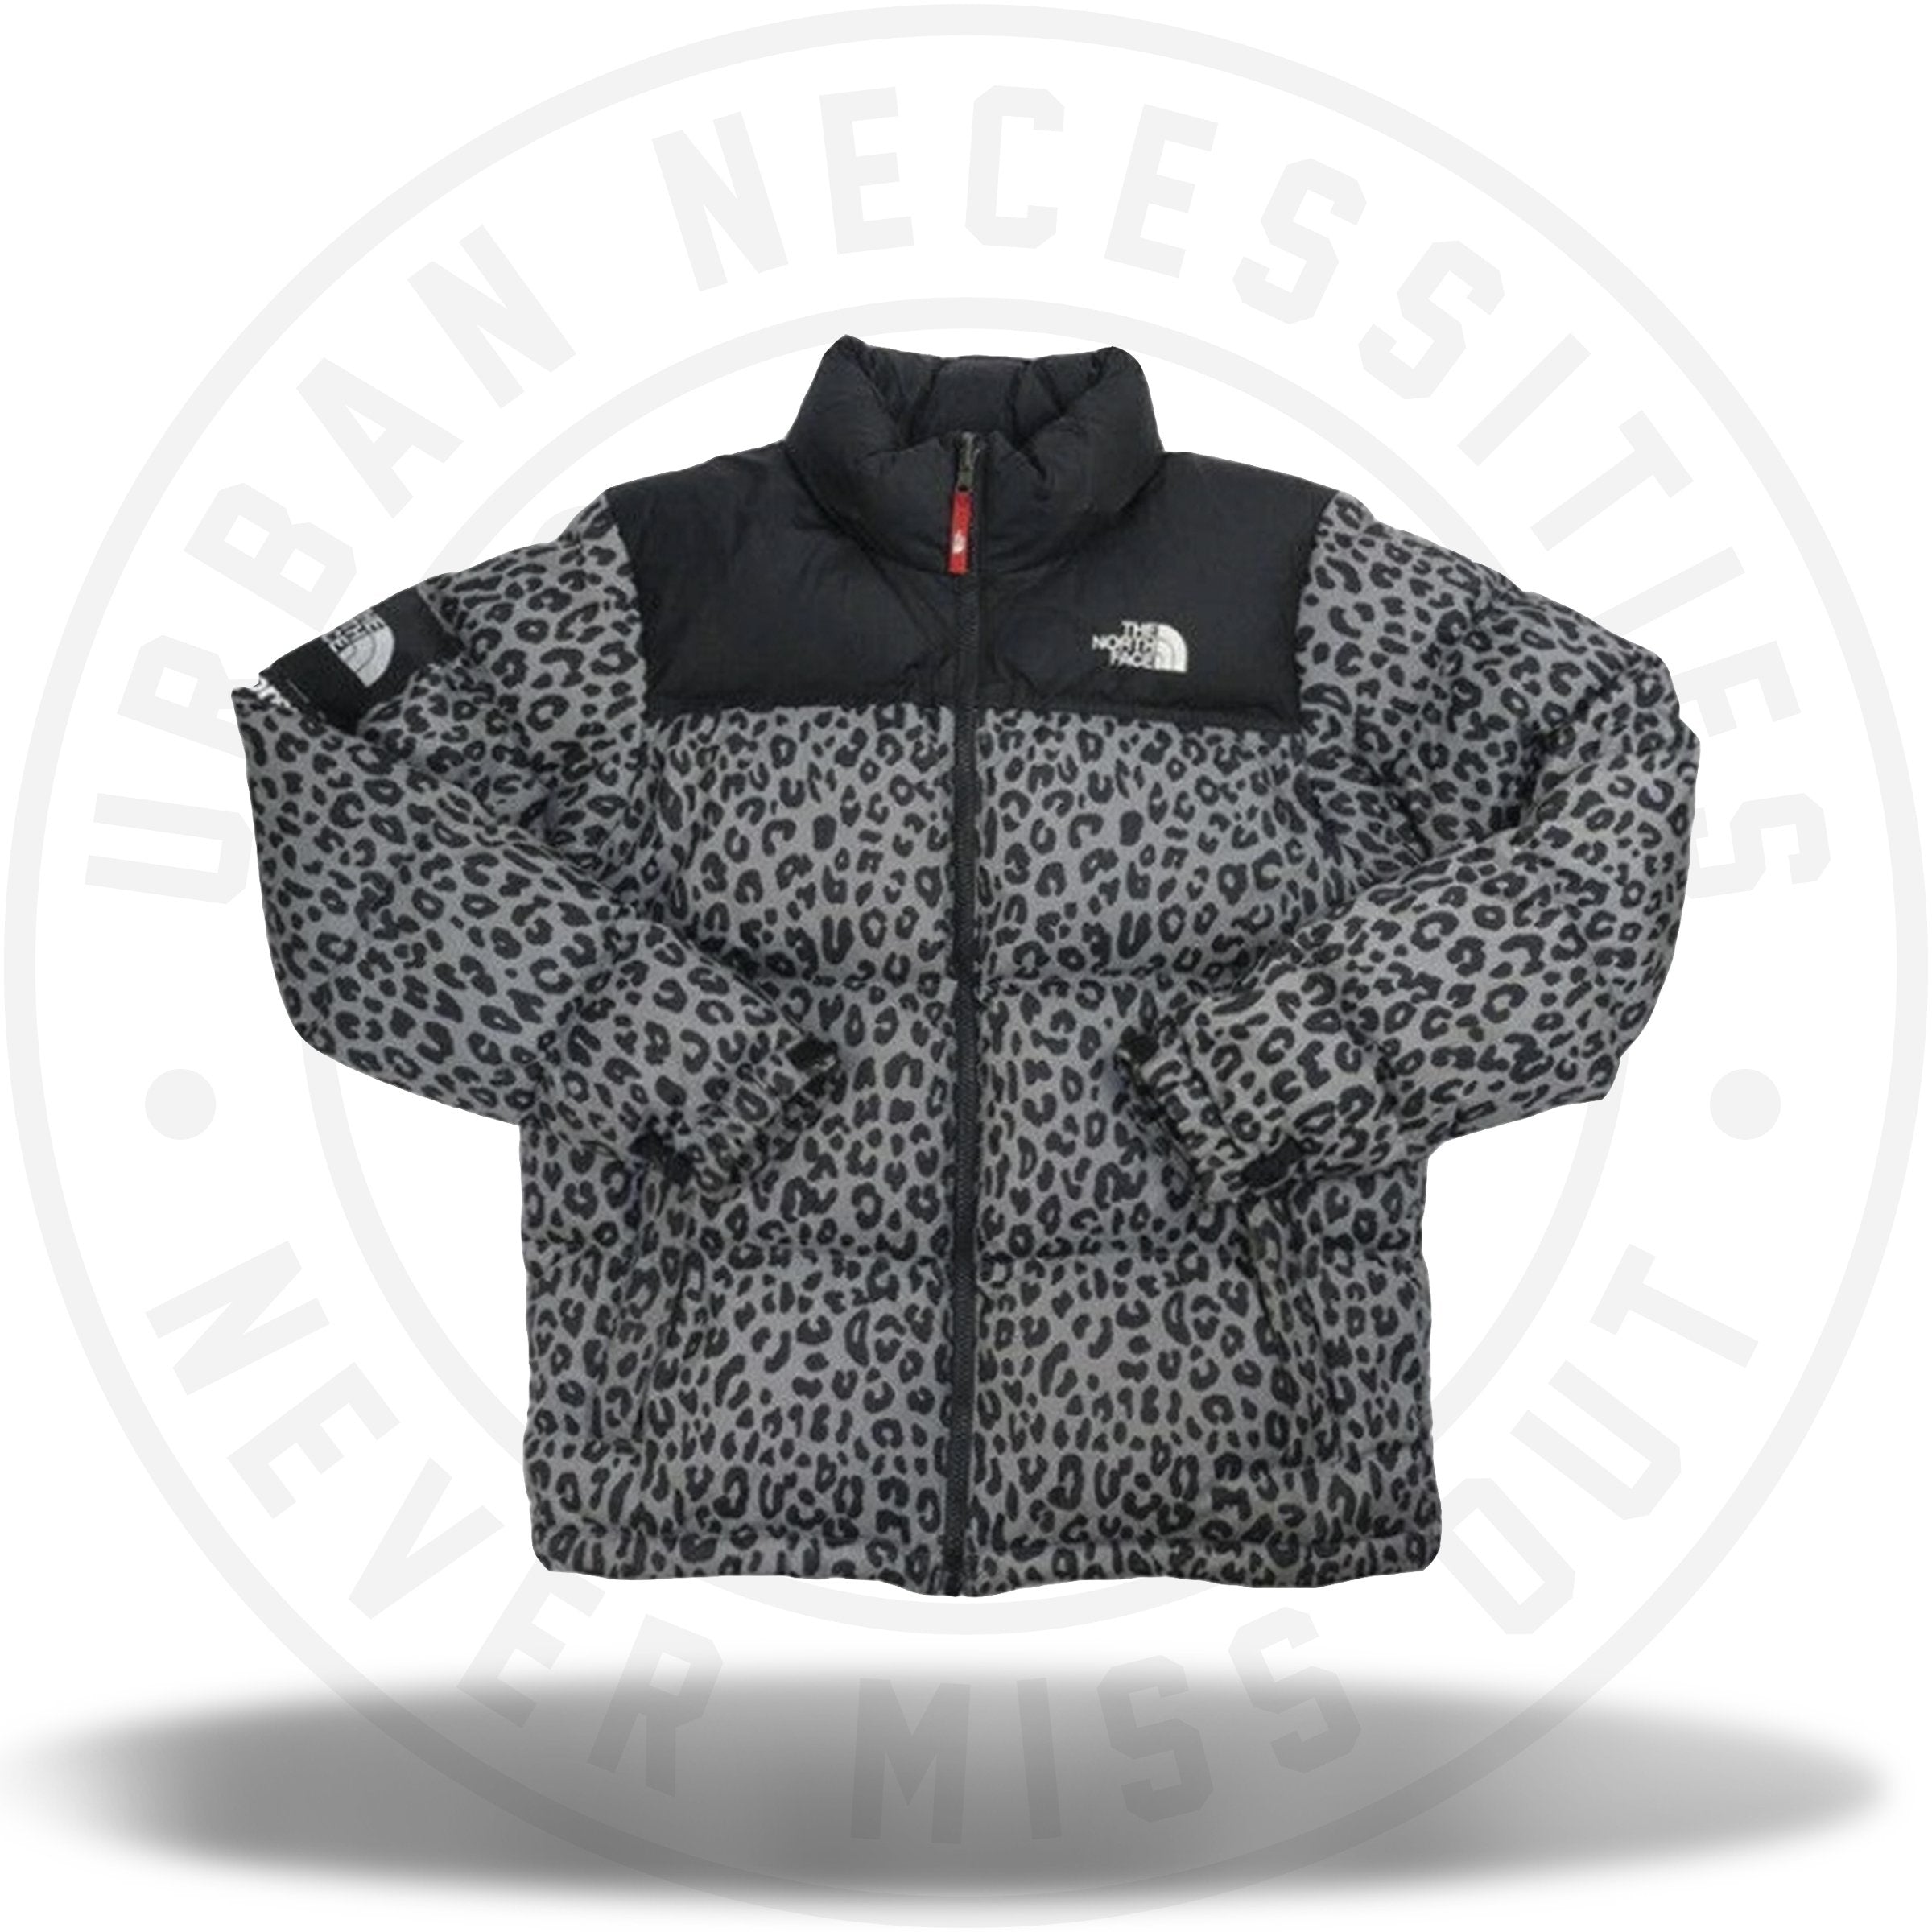 north face leopard jacket